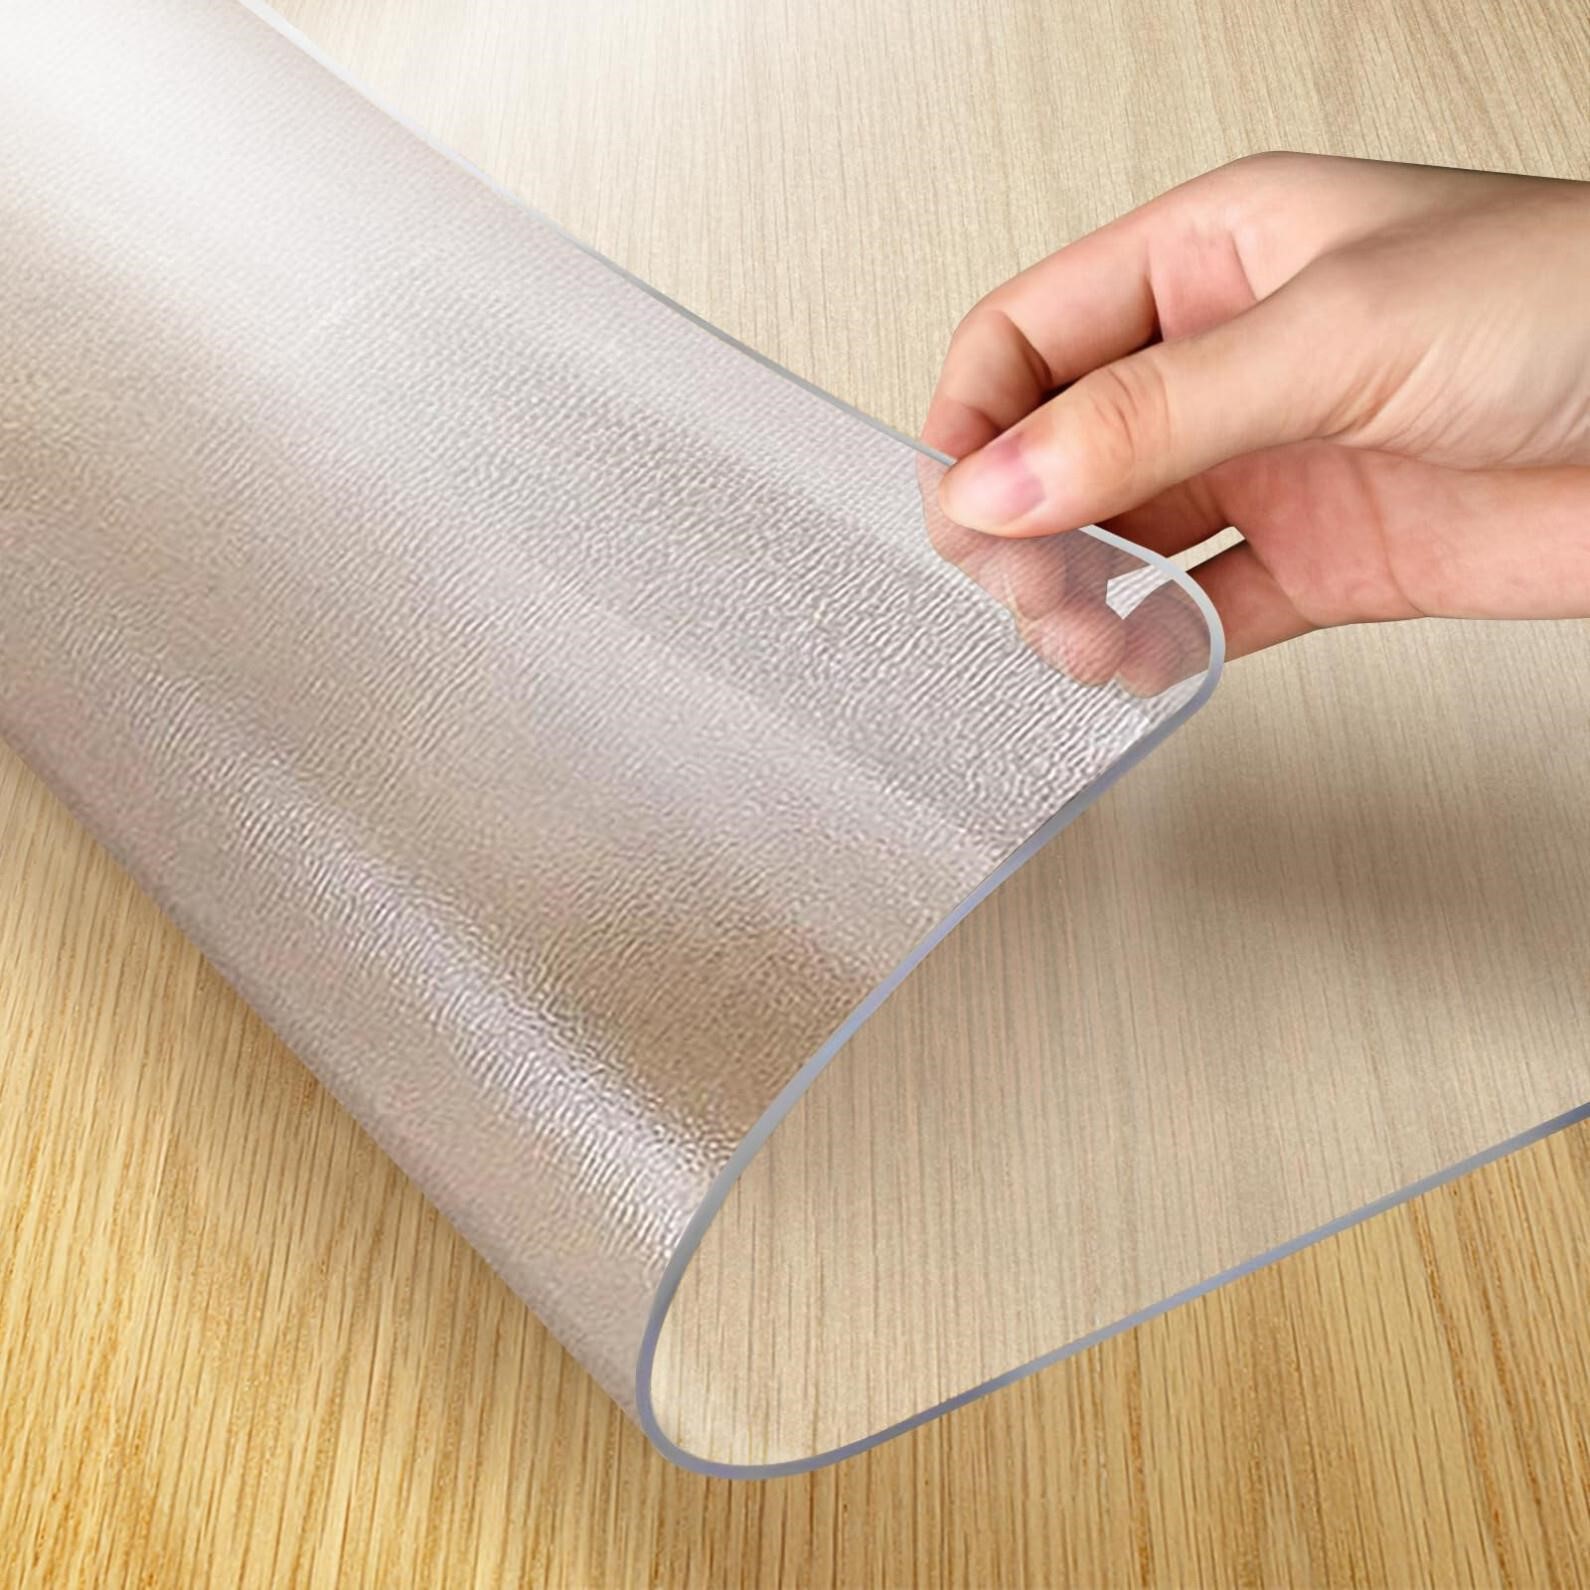 Vicwe 24 x 48 Inch Clear Table Cover Protector,1.5